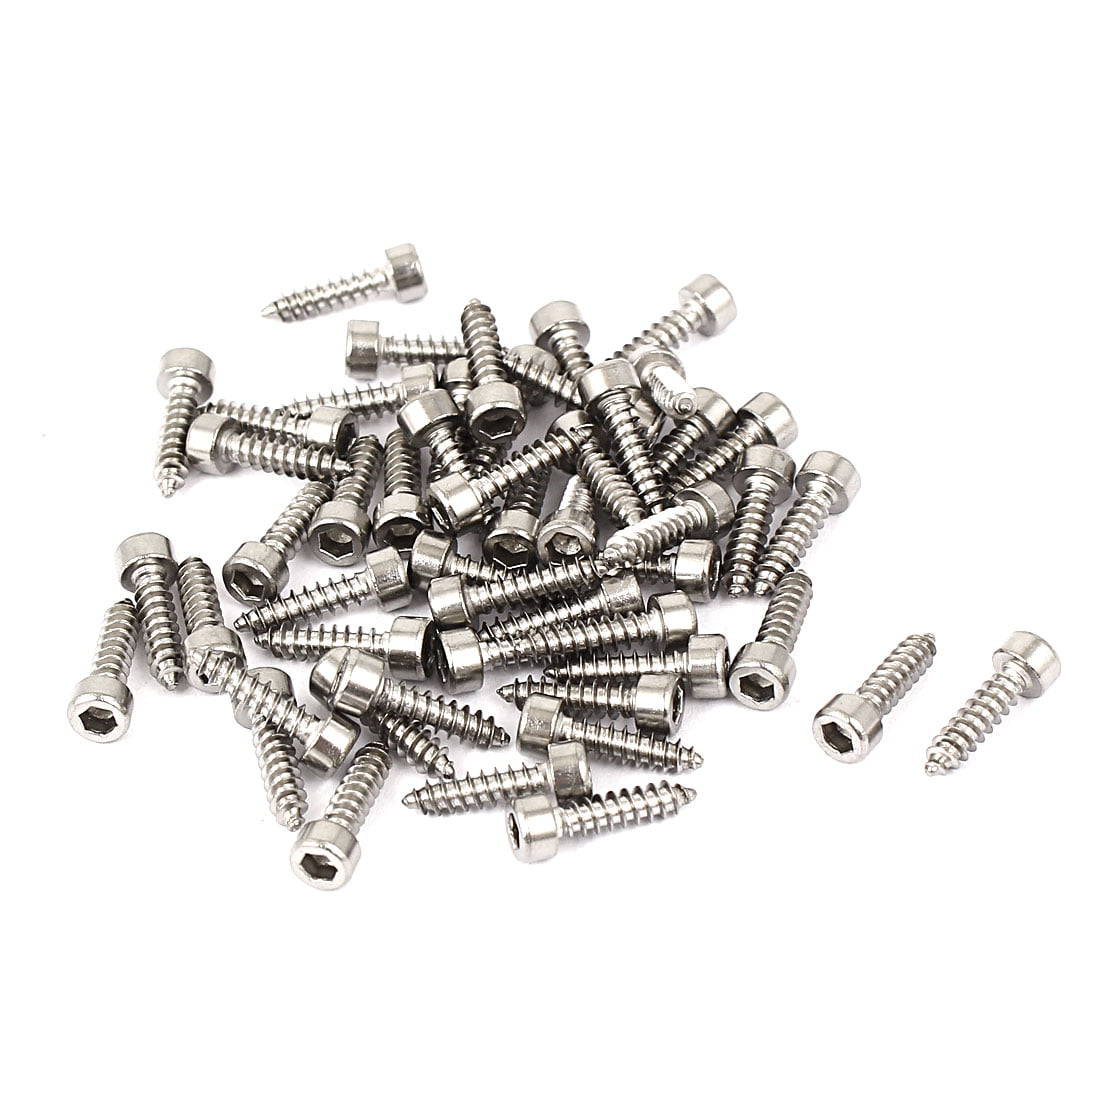 M2x10mm Stainless Steel Hex Drive Head Cap Self Tapping Drilling Screws 50pcs